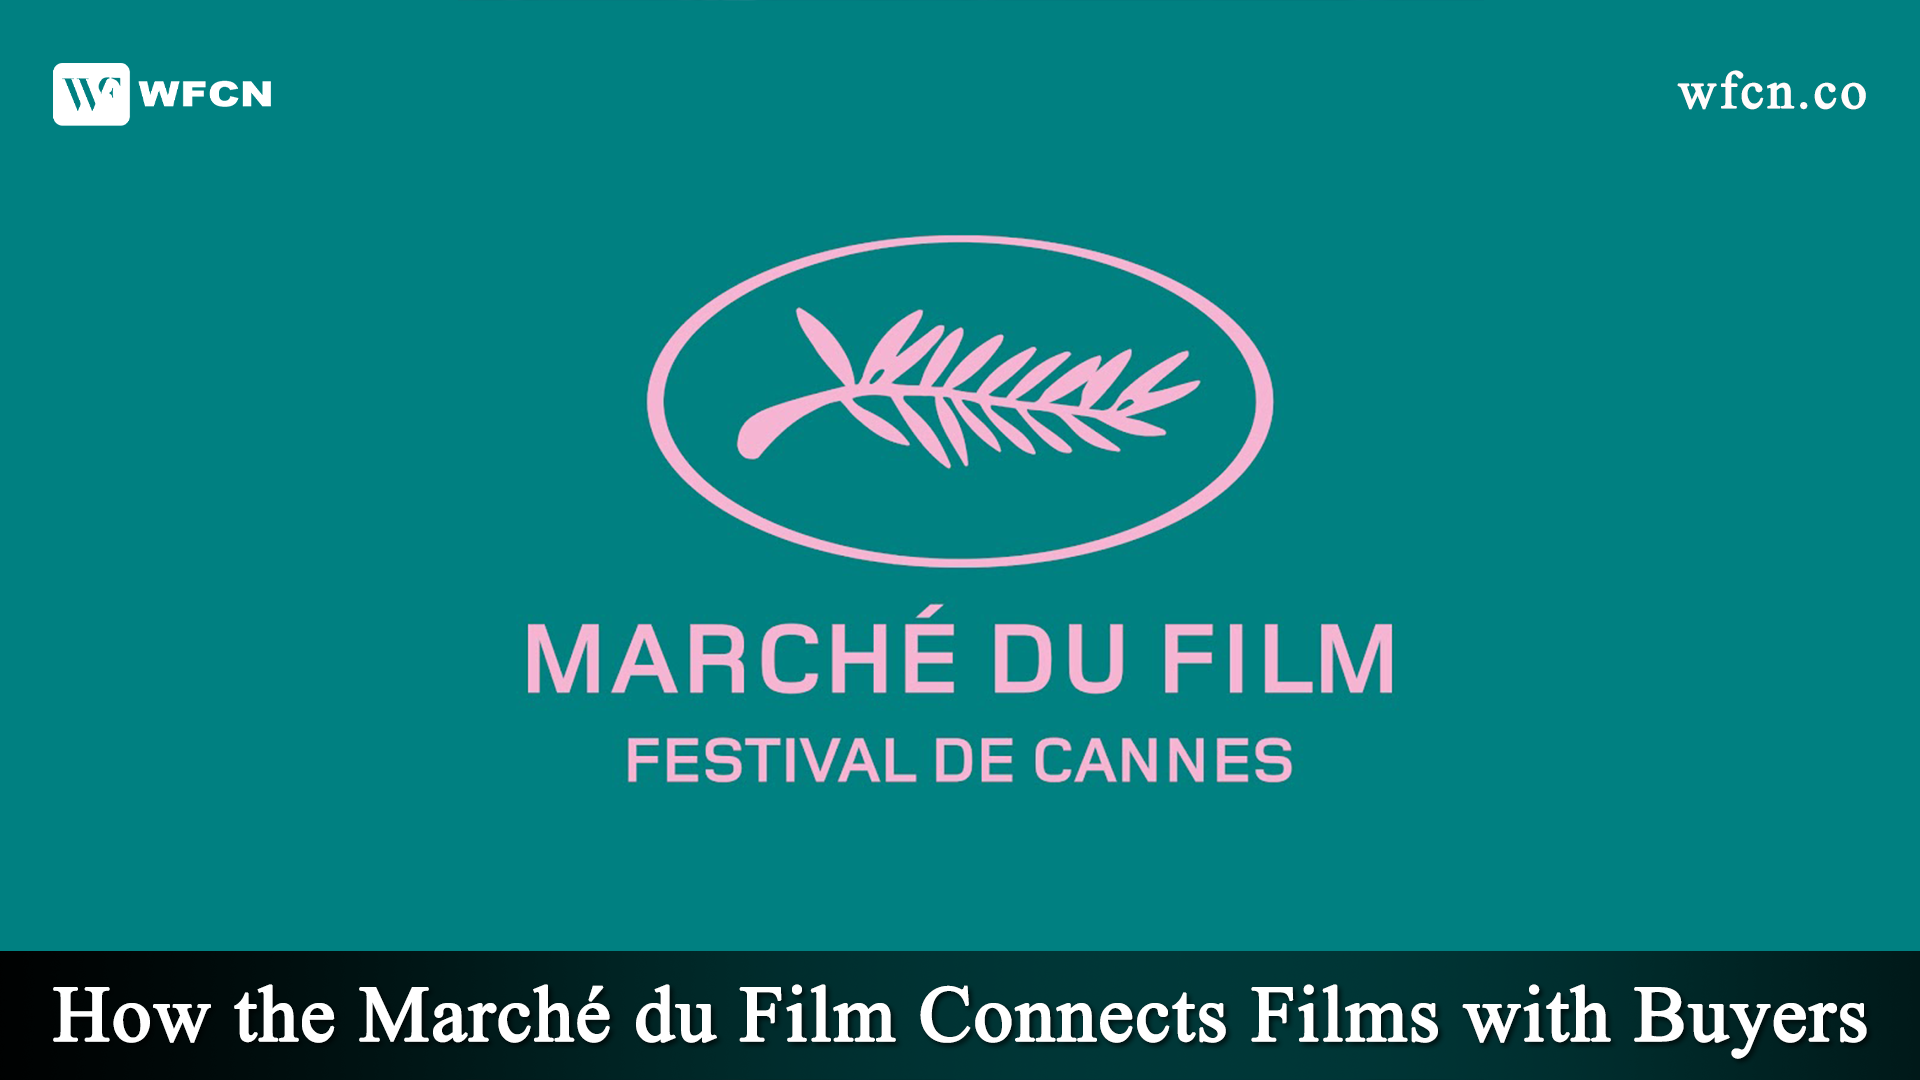 How Marché du Film Connects Films with Buyers